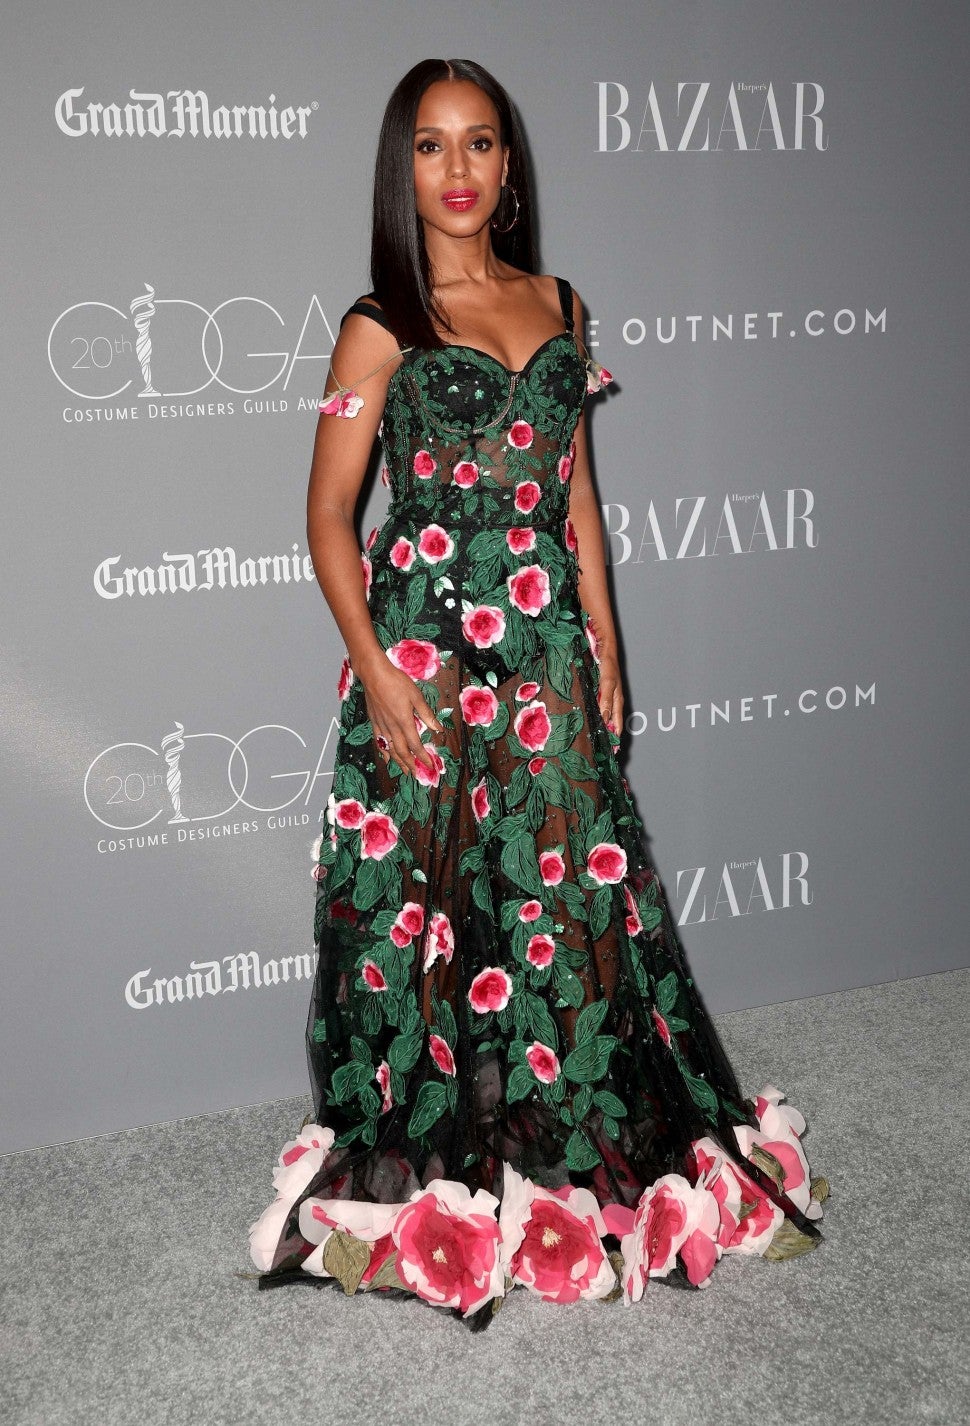 Kerry Washington on the red carpet at the Costume Designers Guild Awards on Feb. 20